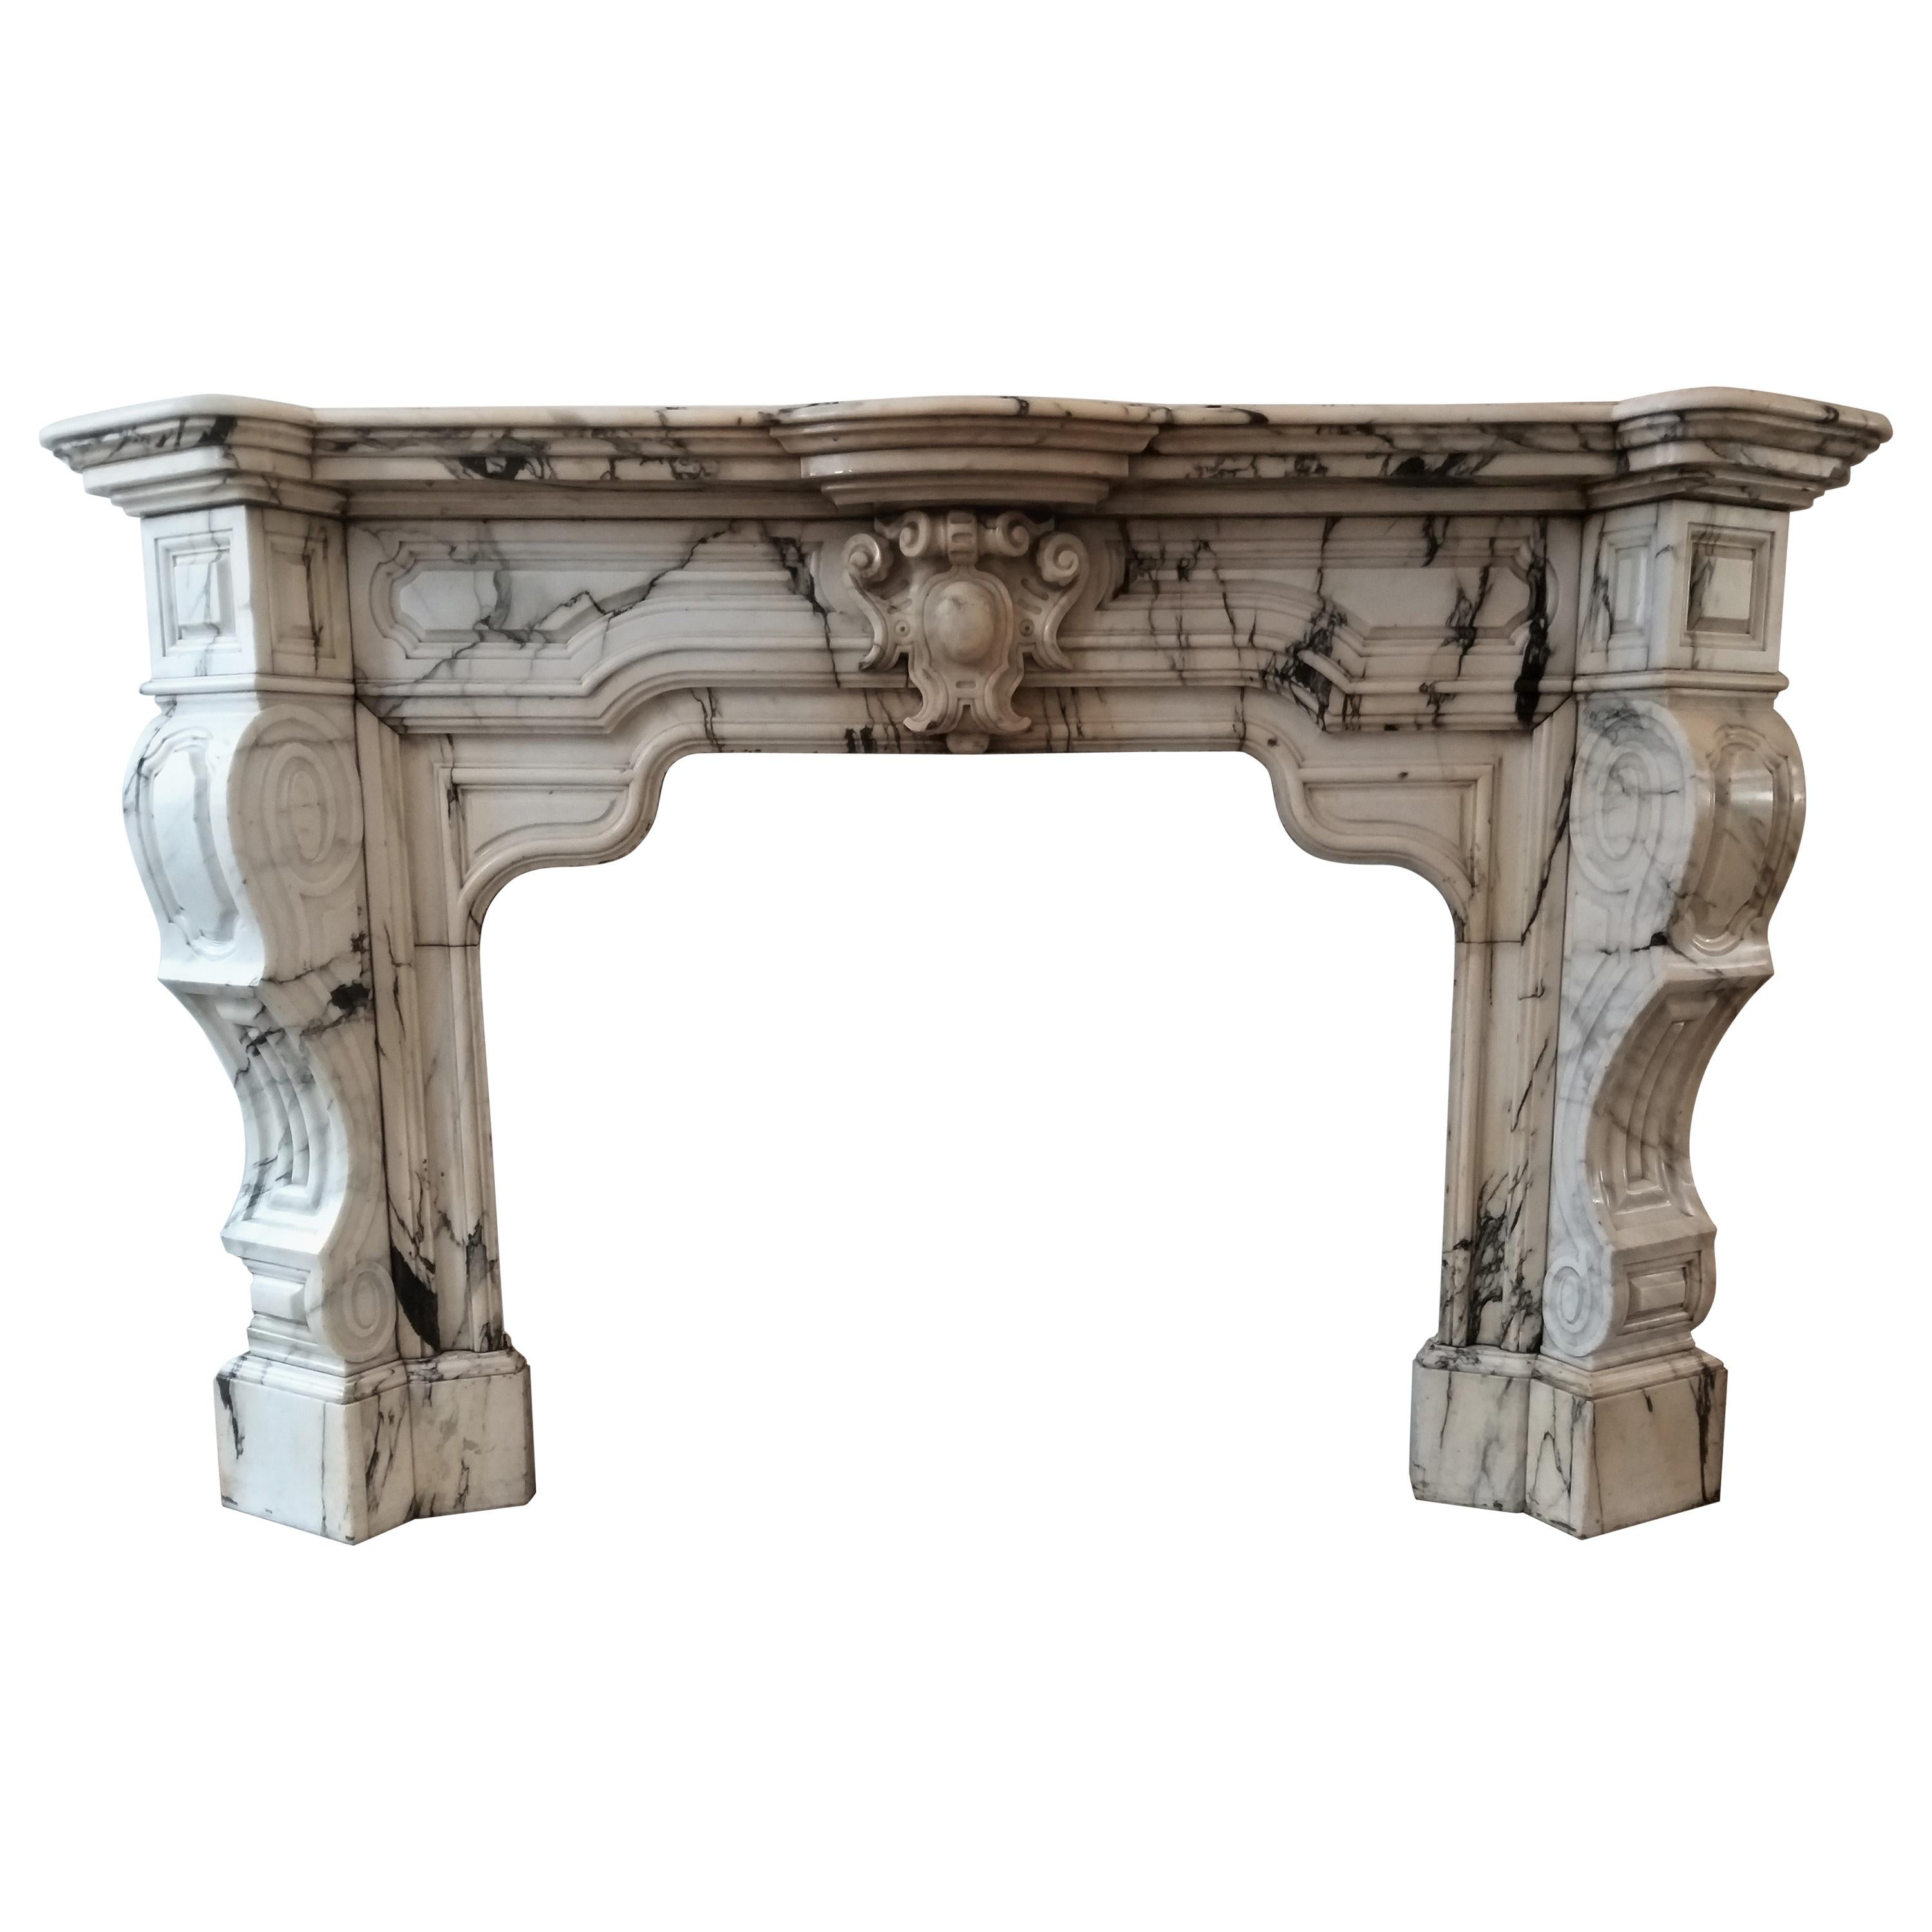 Most Stunning Serrevezza Marble Chimneypiece For Sale